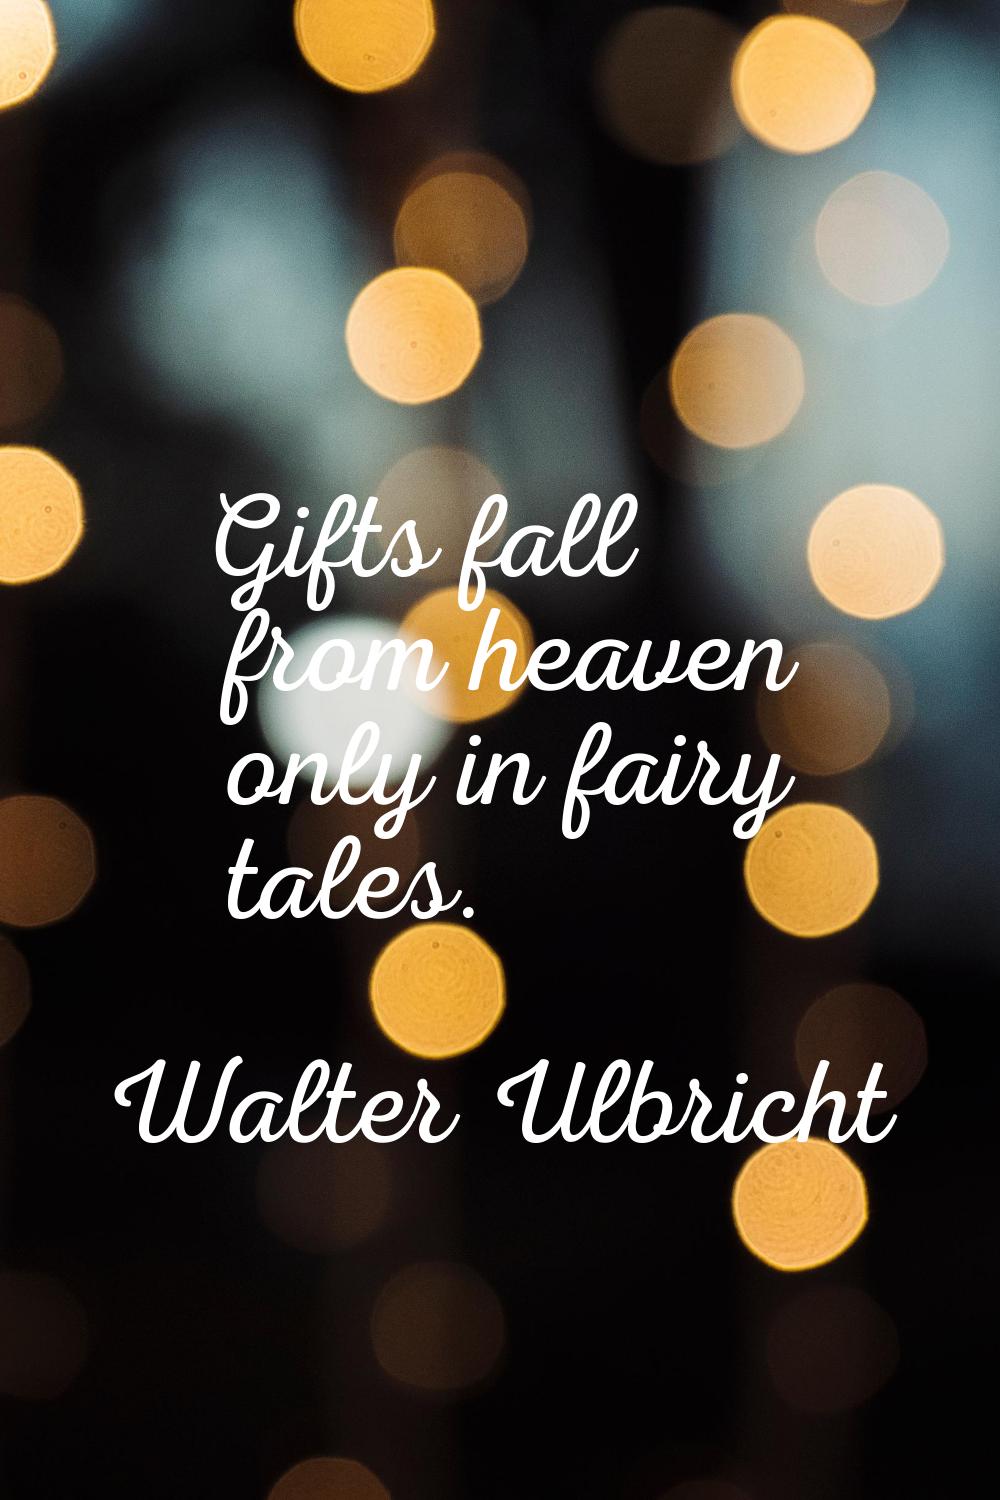 Gifts fall from heaven only in fairy tales.